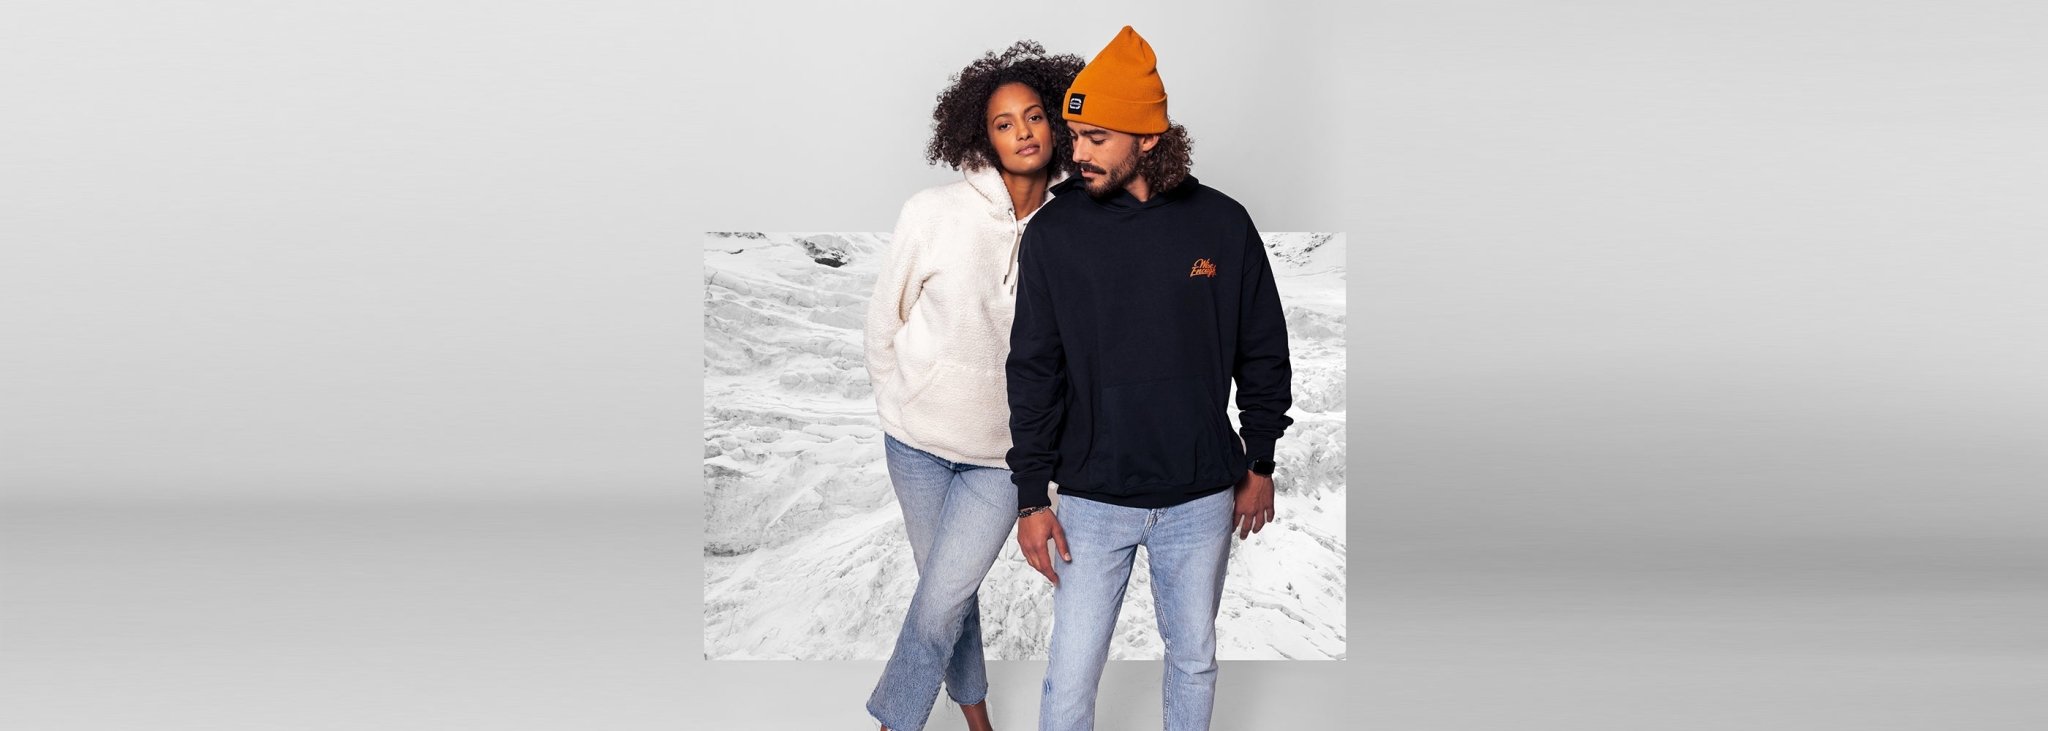 Protect what you love - Winter Drop I - wise enough